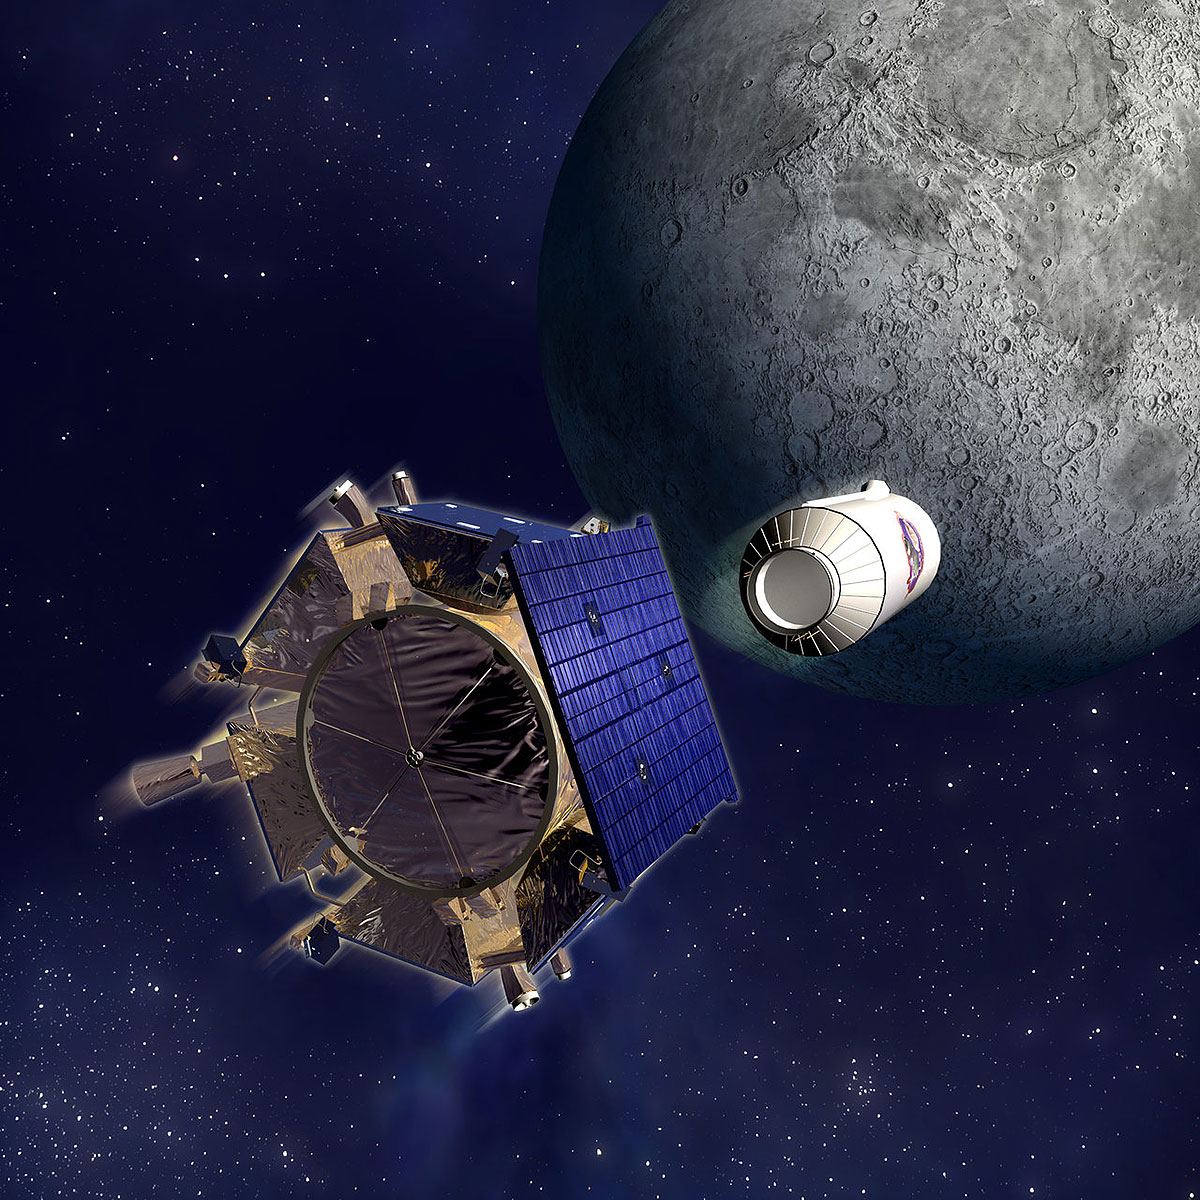 The Nasa LCROSS mision detected gold on the moon in 2009.